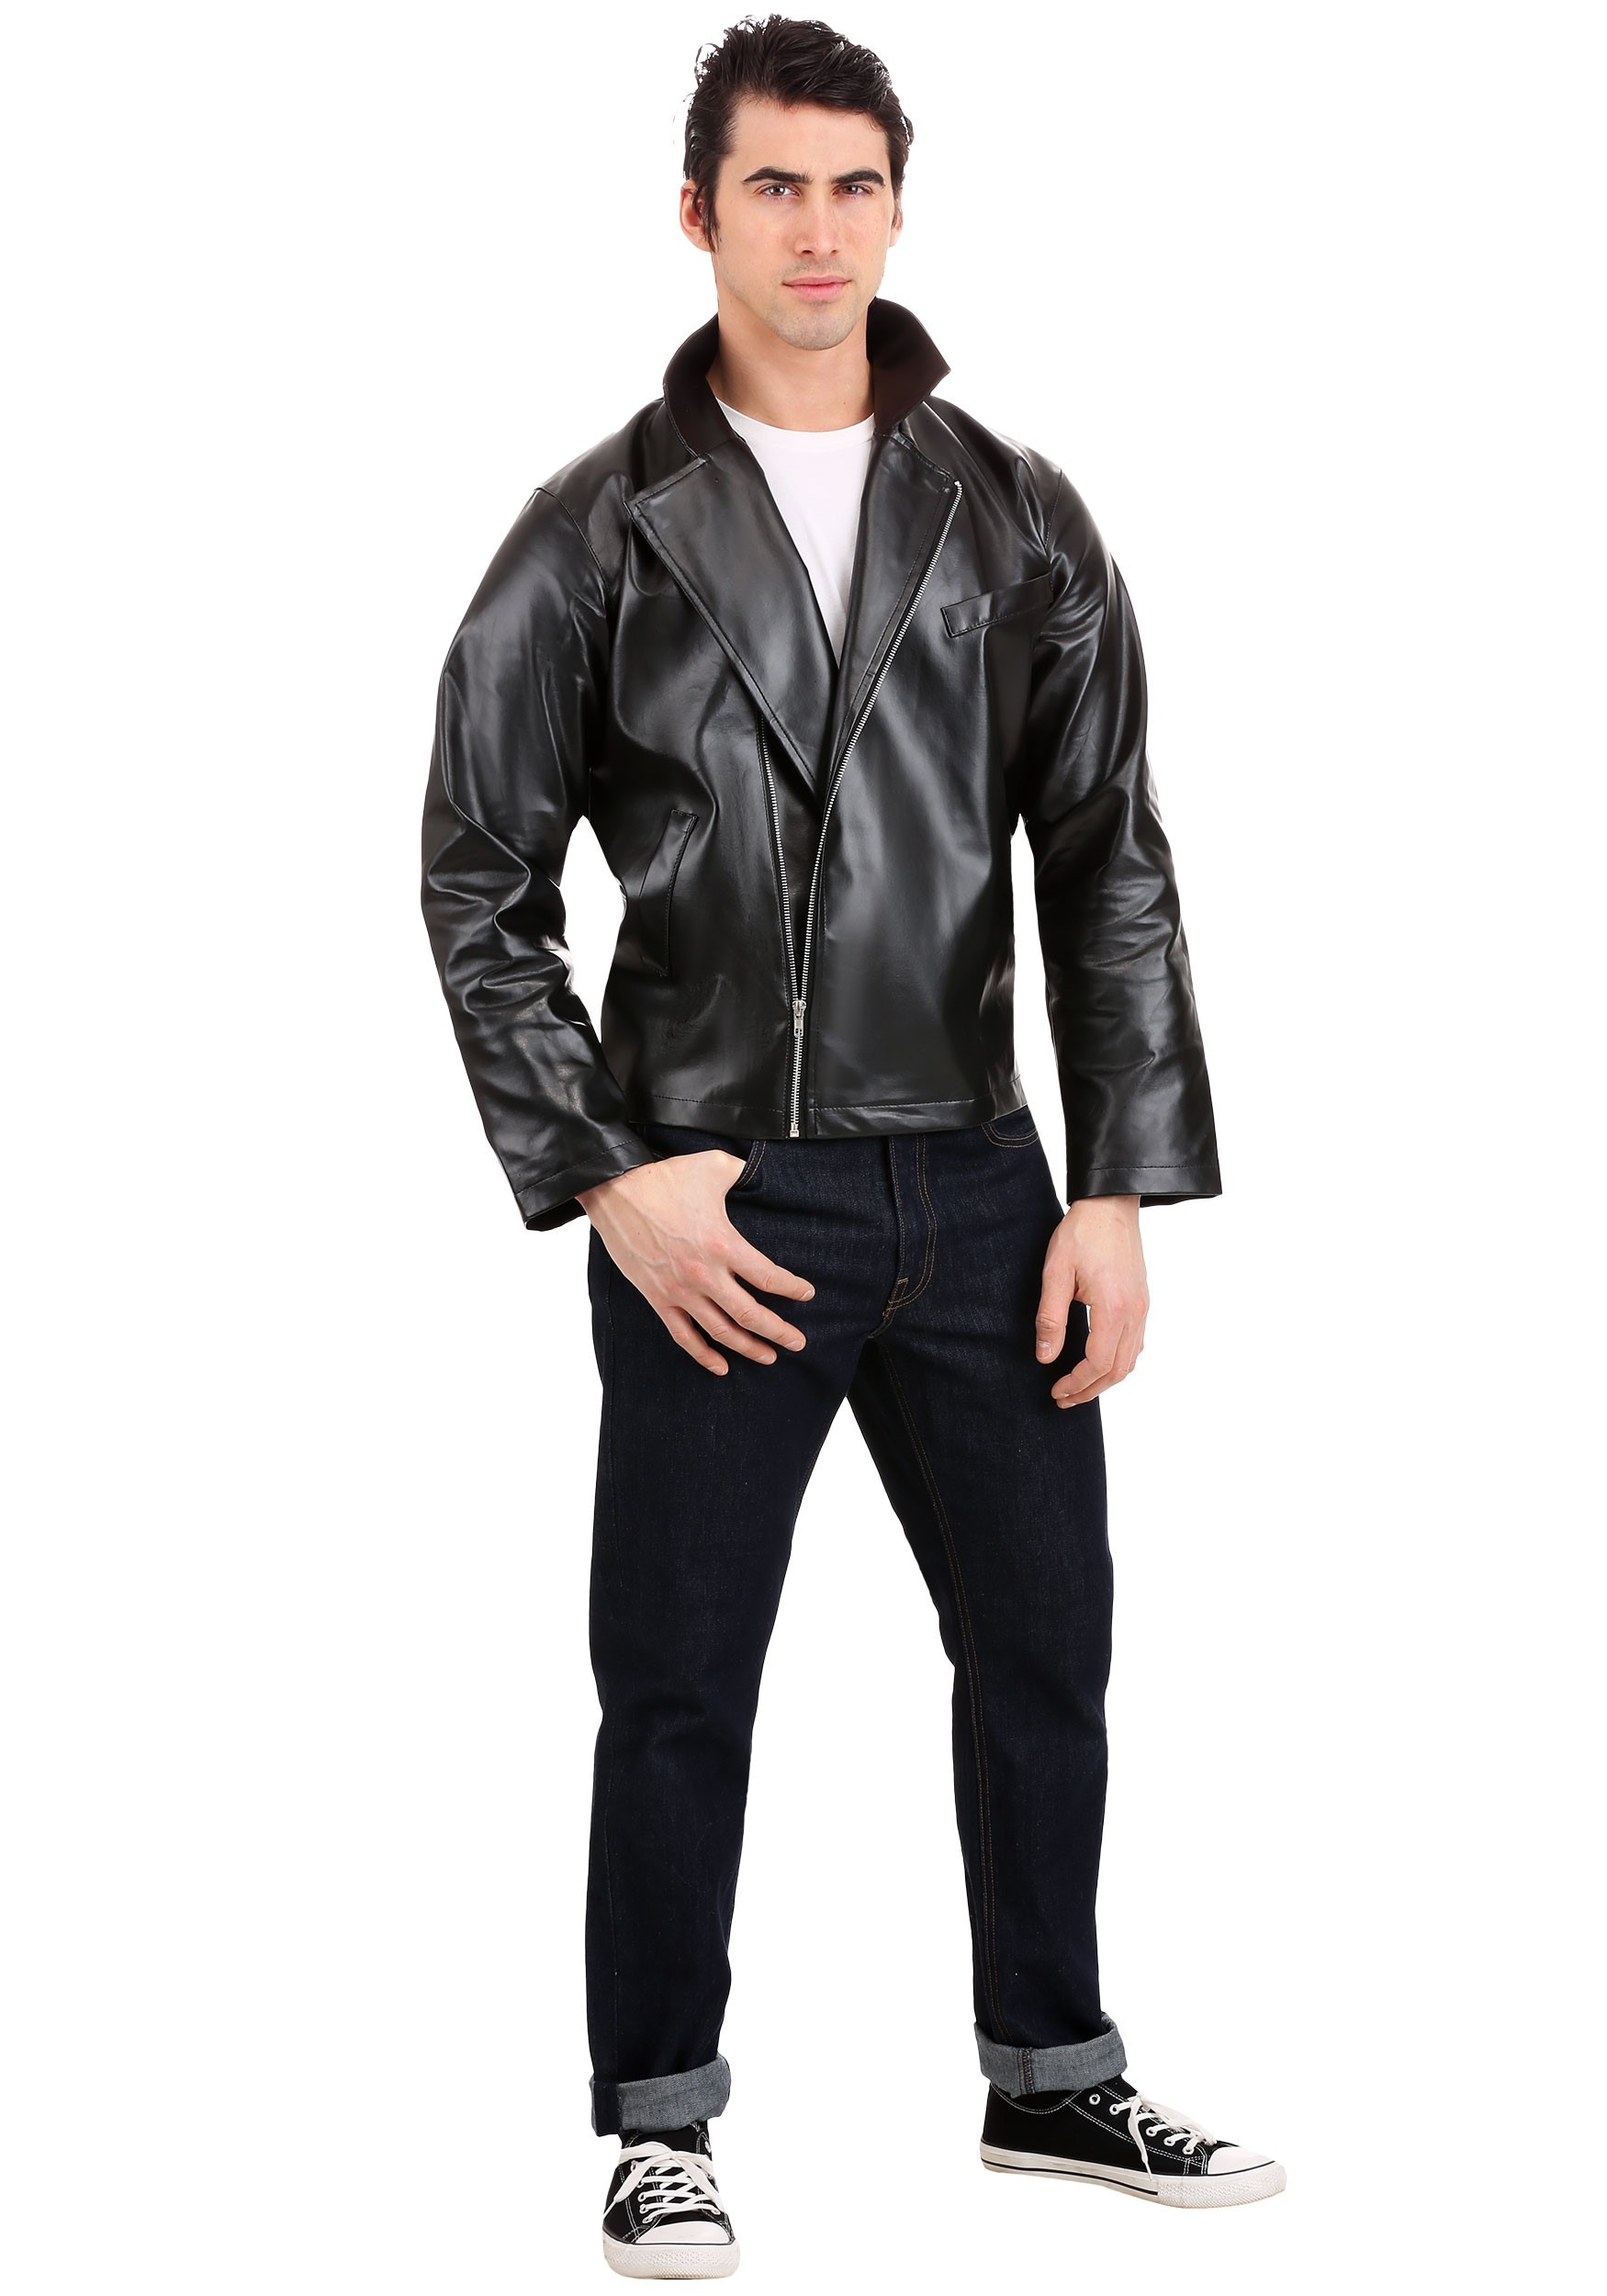 Image of Grease T-Birds Jacket Costume for Men ID GRE6007AD-XL